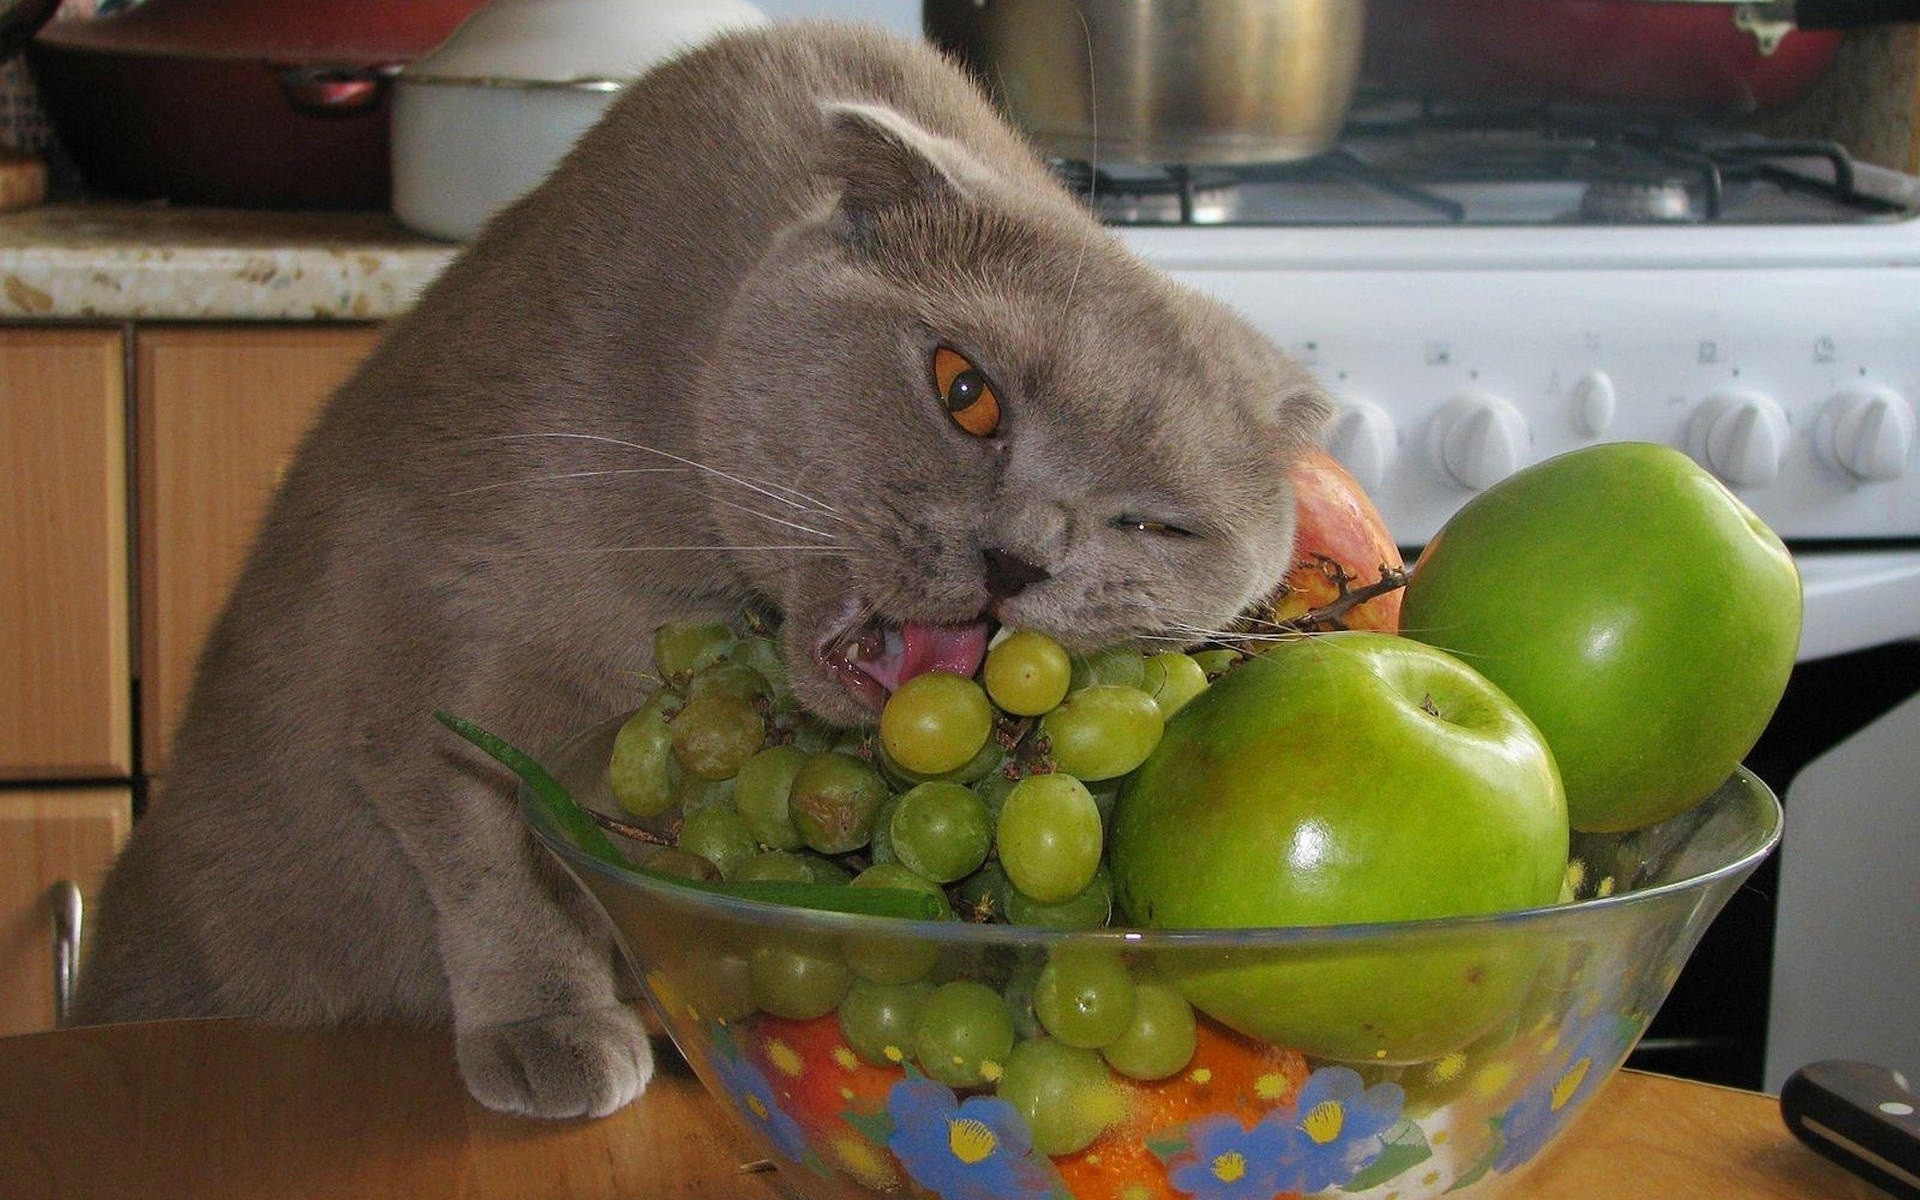 Solve Cat Eating Grapes jigsaw puzzle online with 96 pieces